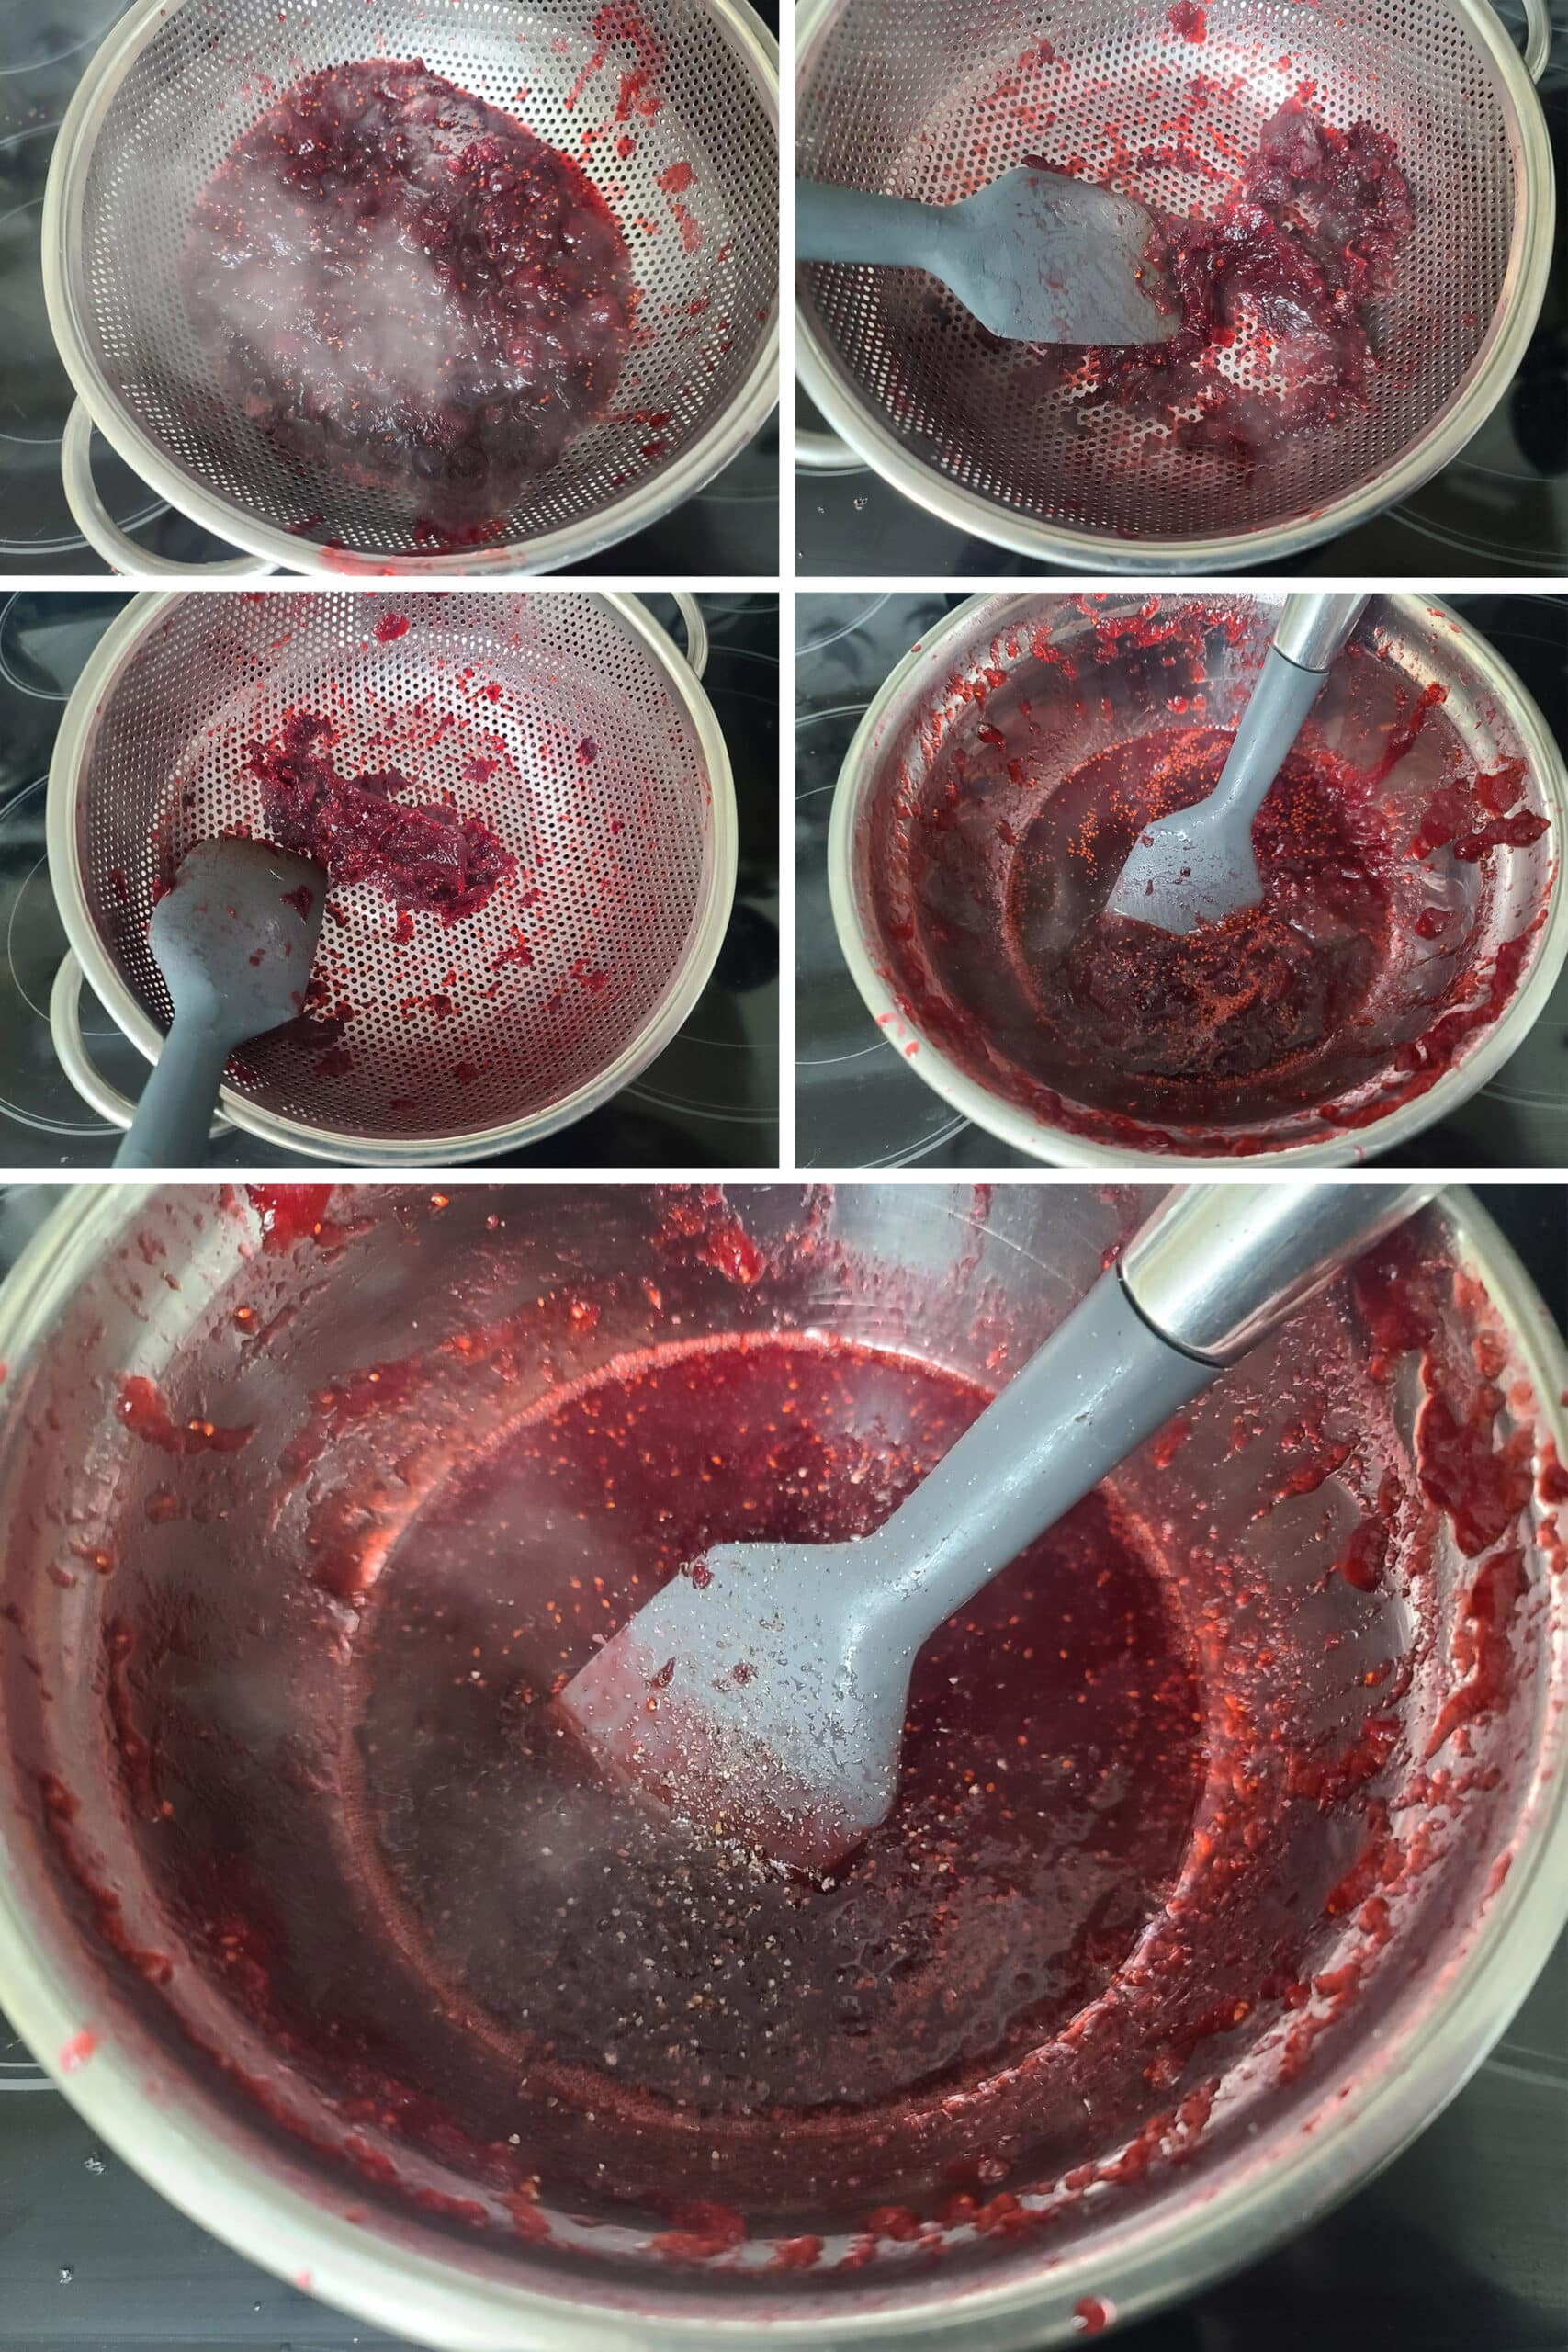 5 part image showing the cranberry sauce being pressed through a sieve.